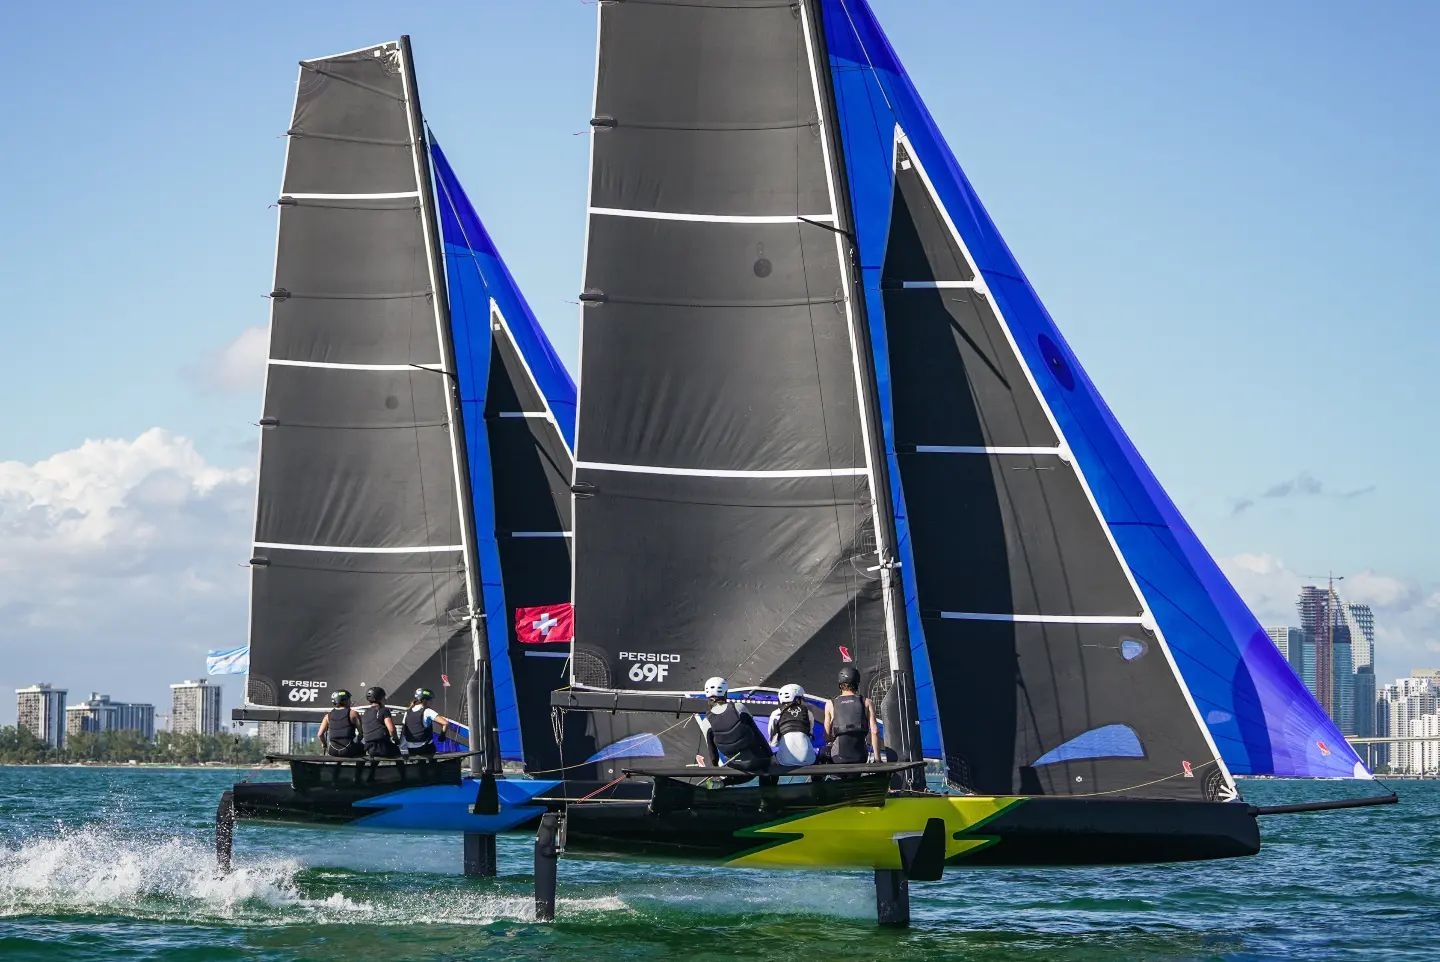  Persico 69F  Youth Gold Cup  Miami FL, USA  Day 4